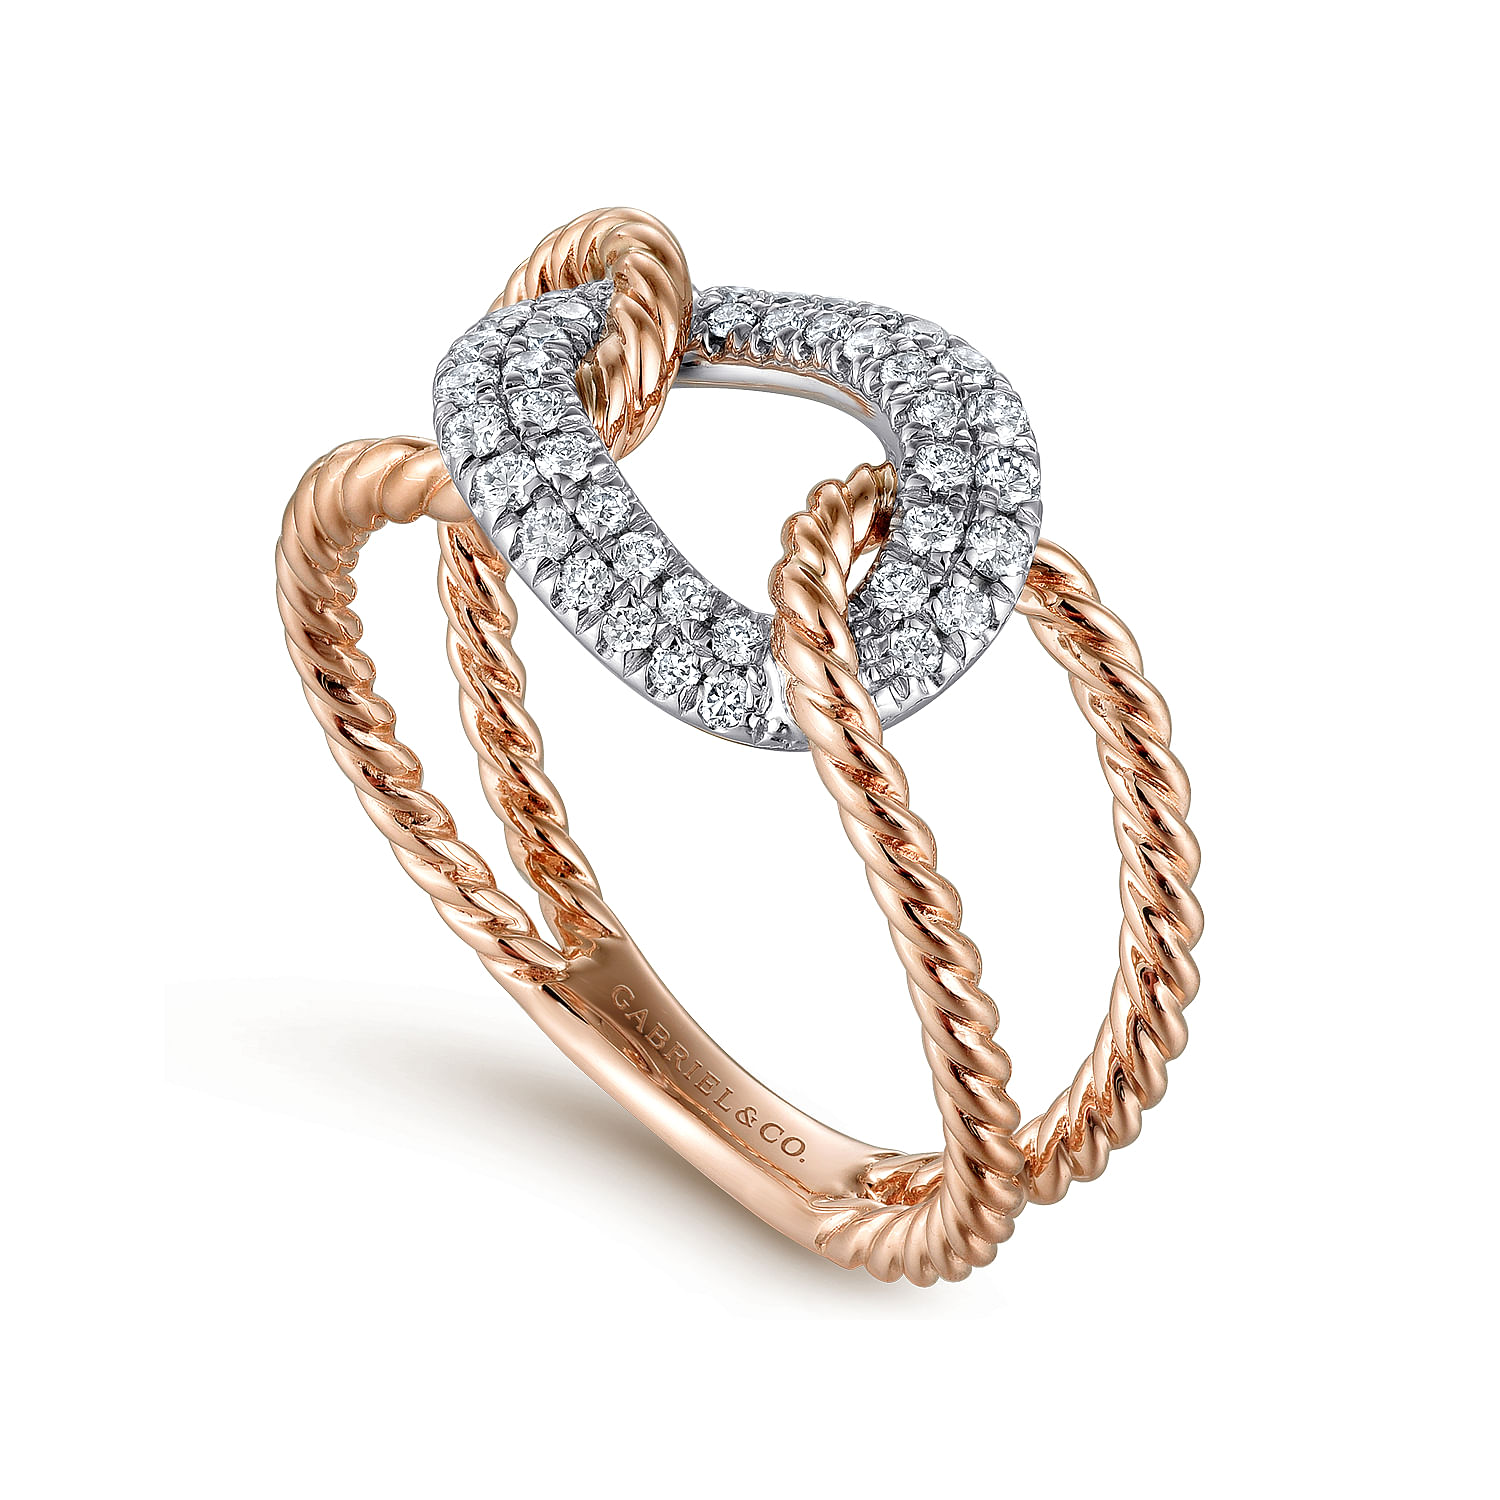 14K White and Rose Gold Twisted Rope Link Ring with Diamond Pavé Station